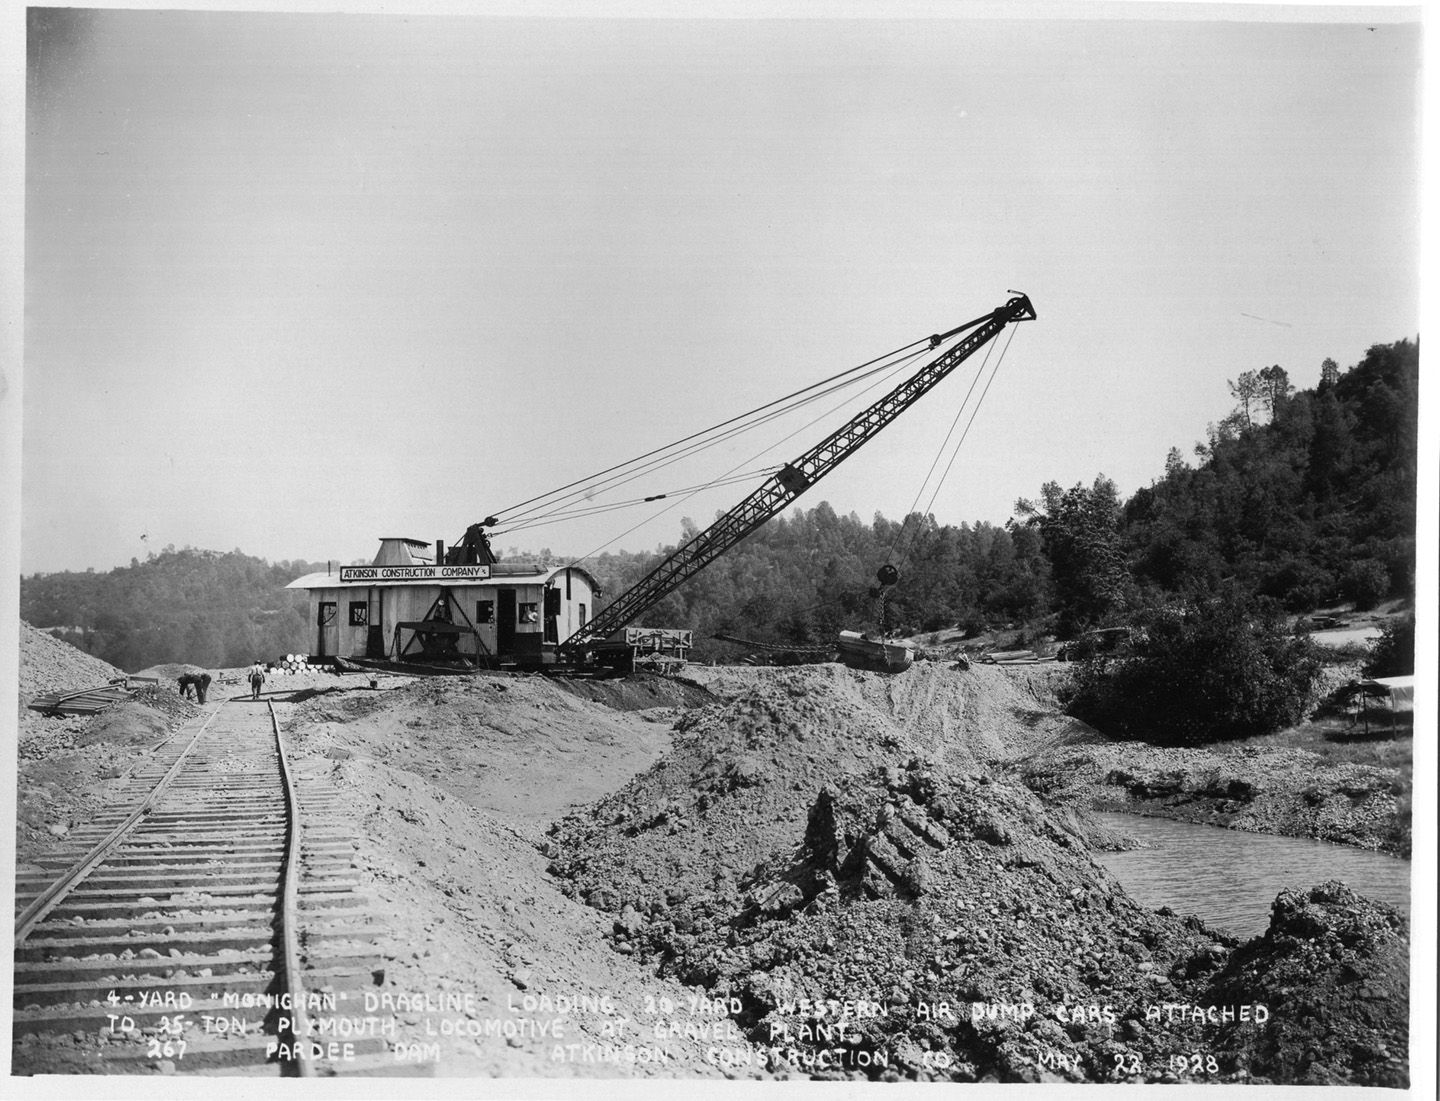 4-yard dragline loading 20 yard western air dump cars attached to 25-ton Plymouth locomotive at gravel plant. (May 1928)